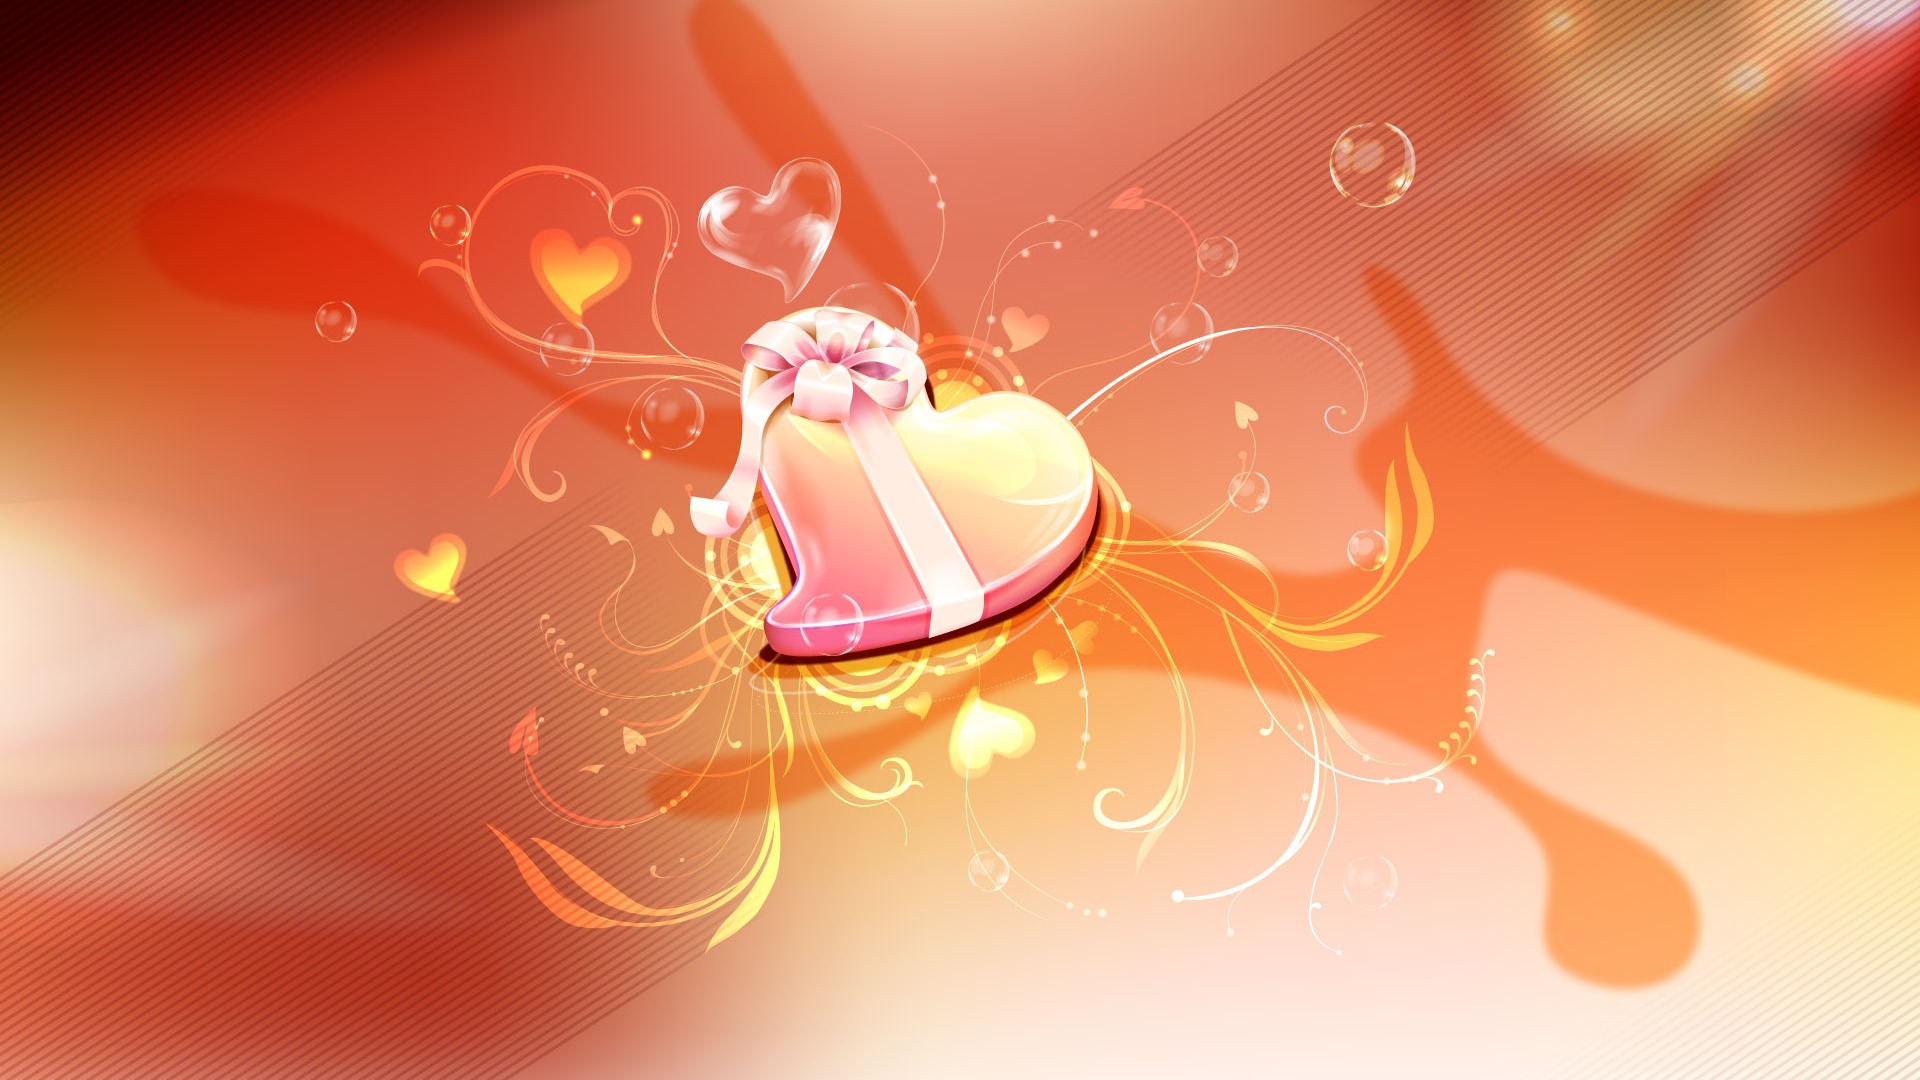 Valentine's Day Love Theme Wallpapers (2) #11 - 1920x1080